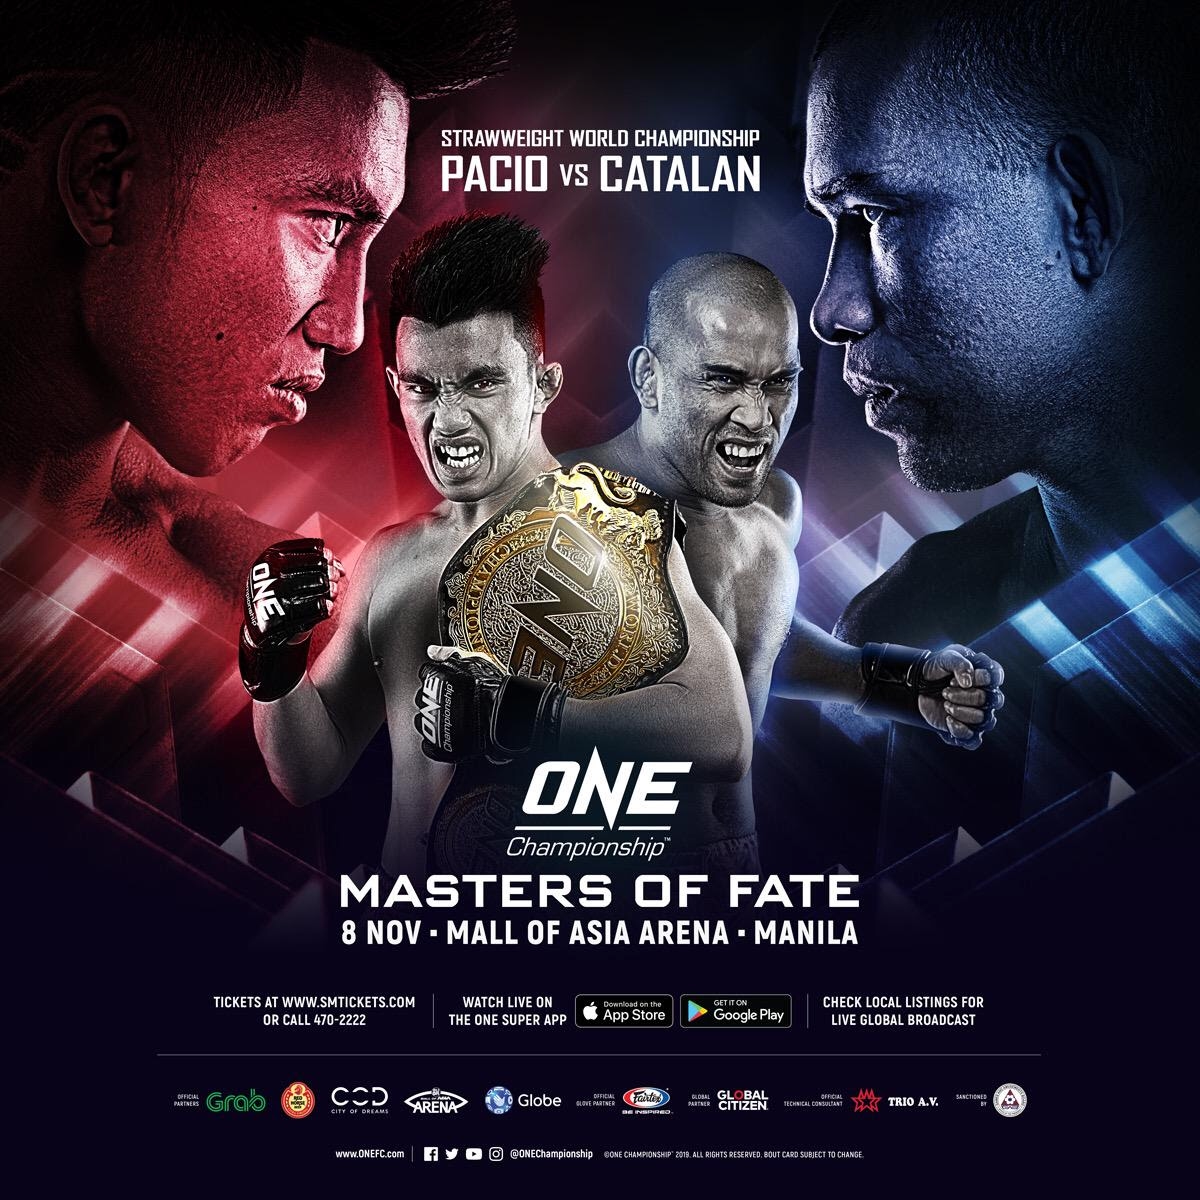 One championship masters of fate